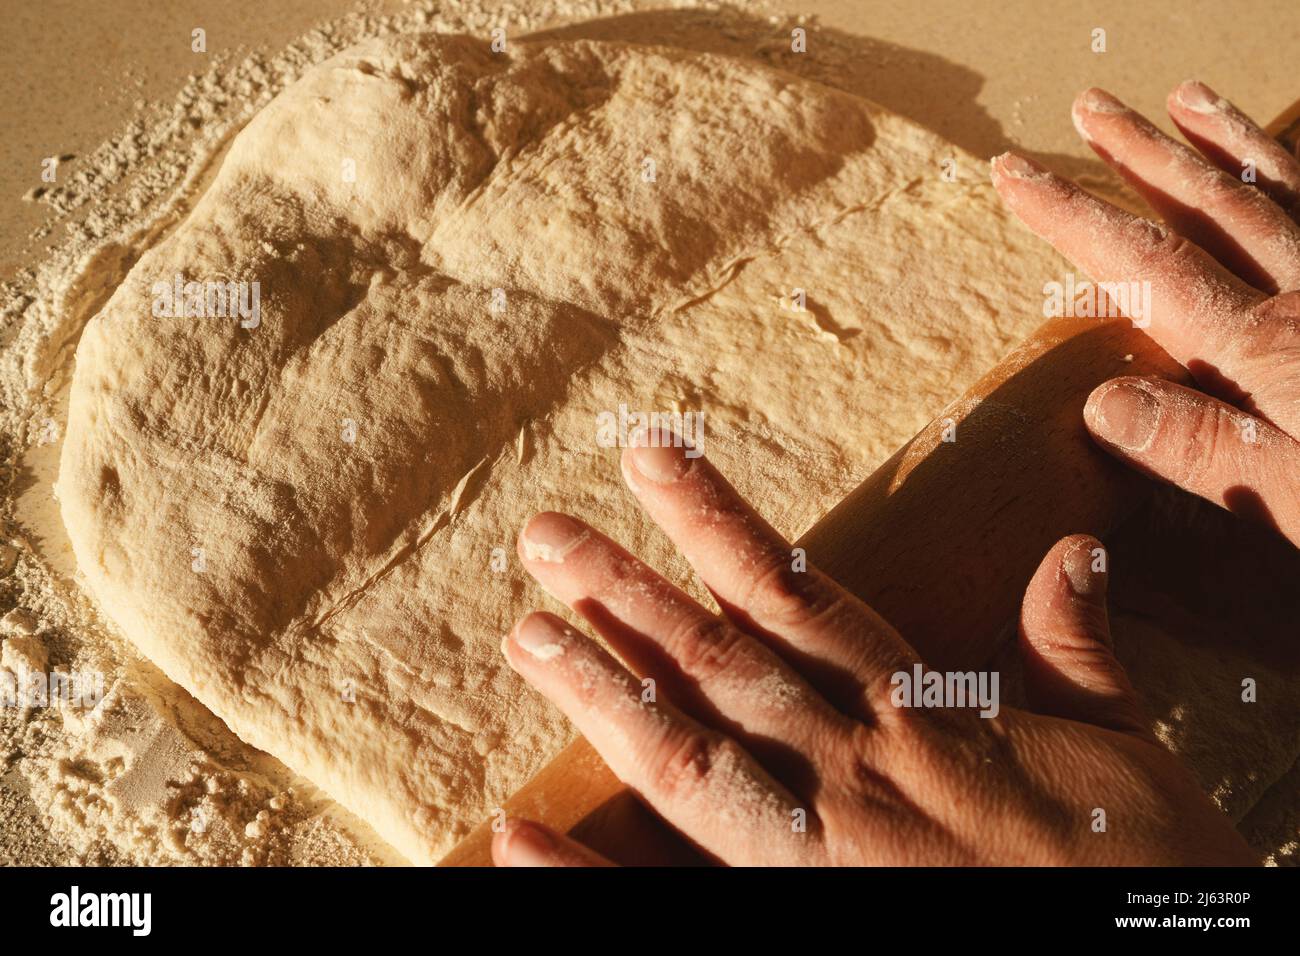 Preparing the dough for bread, kneading the dough with a rolling pin on the table. Stock Photo